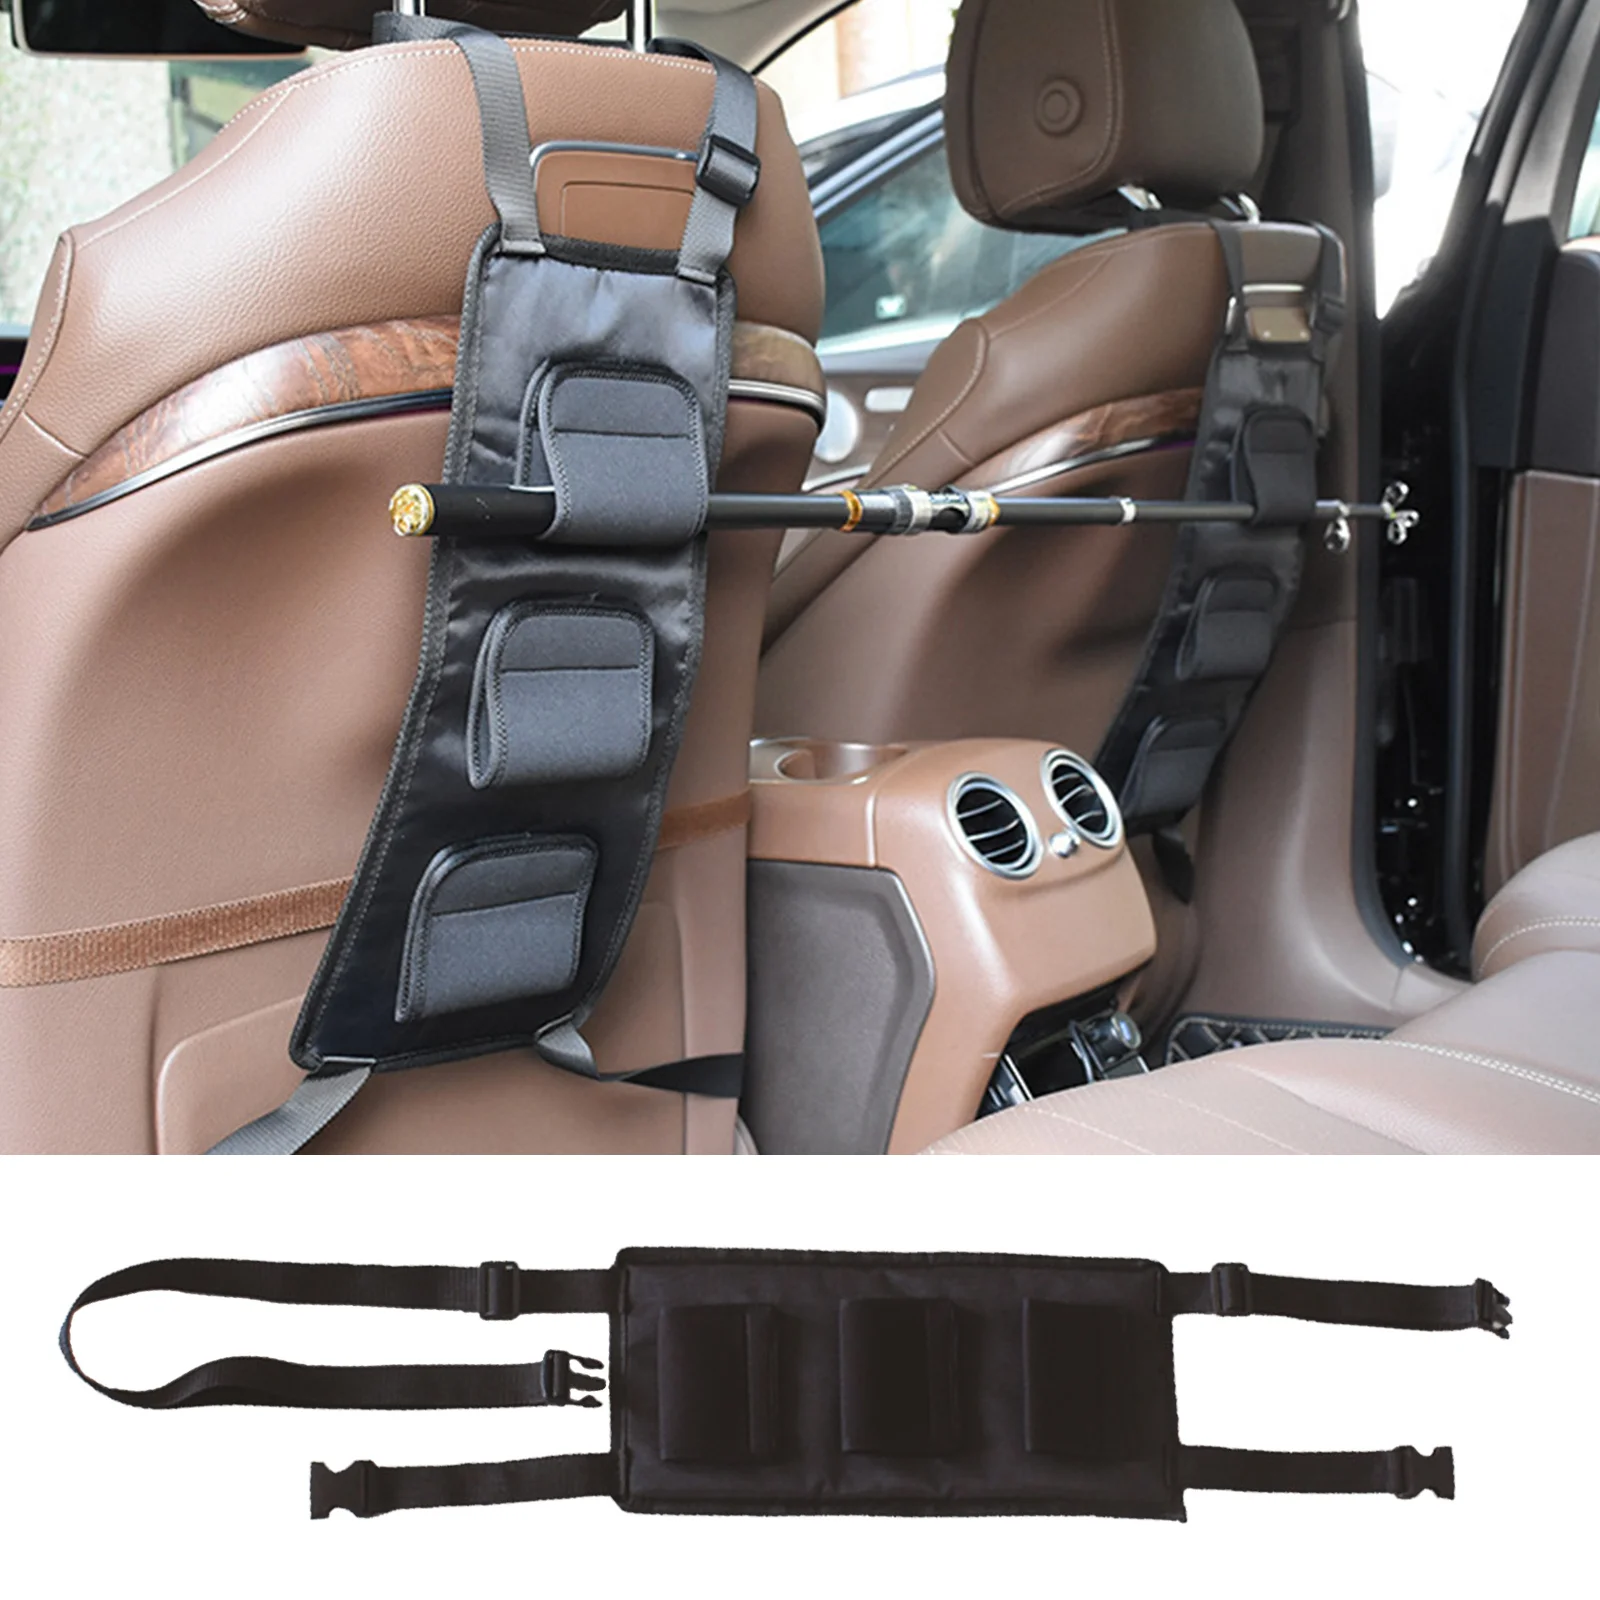 

2Pcs Fishing Rod Holder Carrier For Vehicle Backseat Holders 3 Poles Suitable For Car Most Models Fishing Tackle Tool